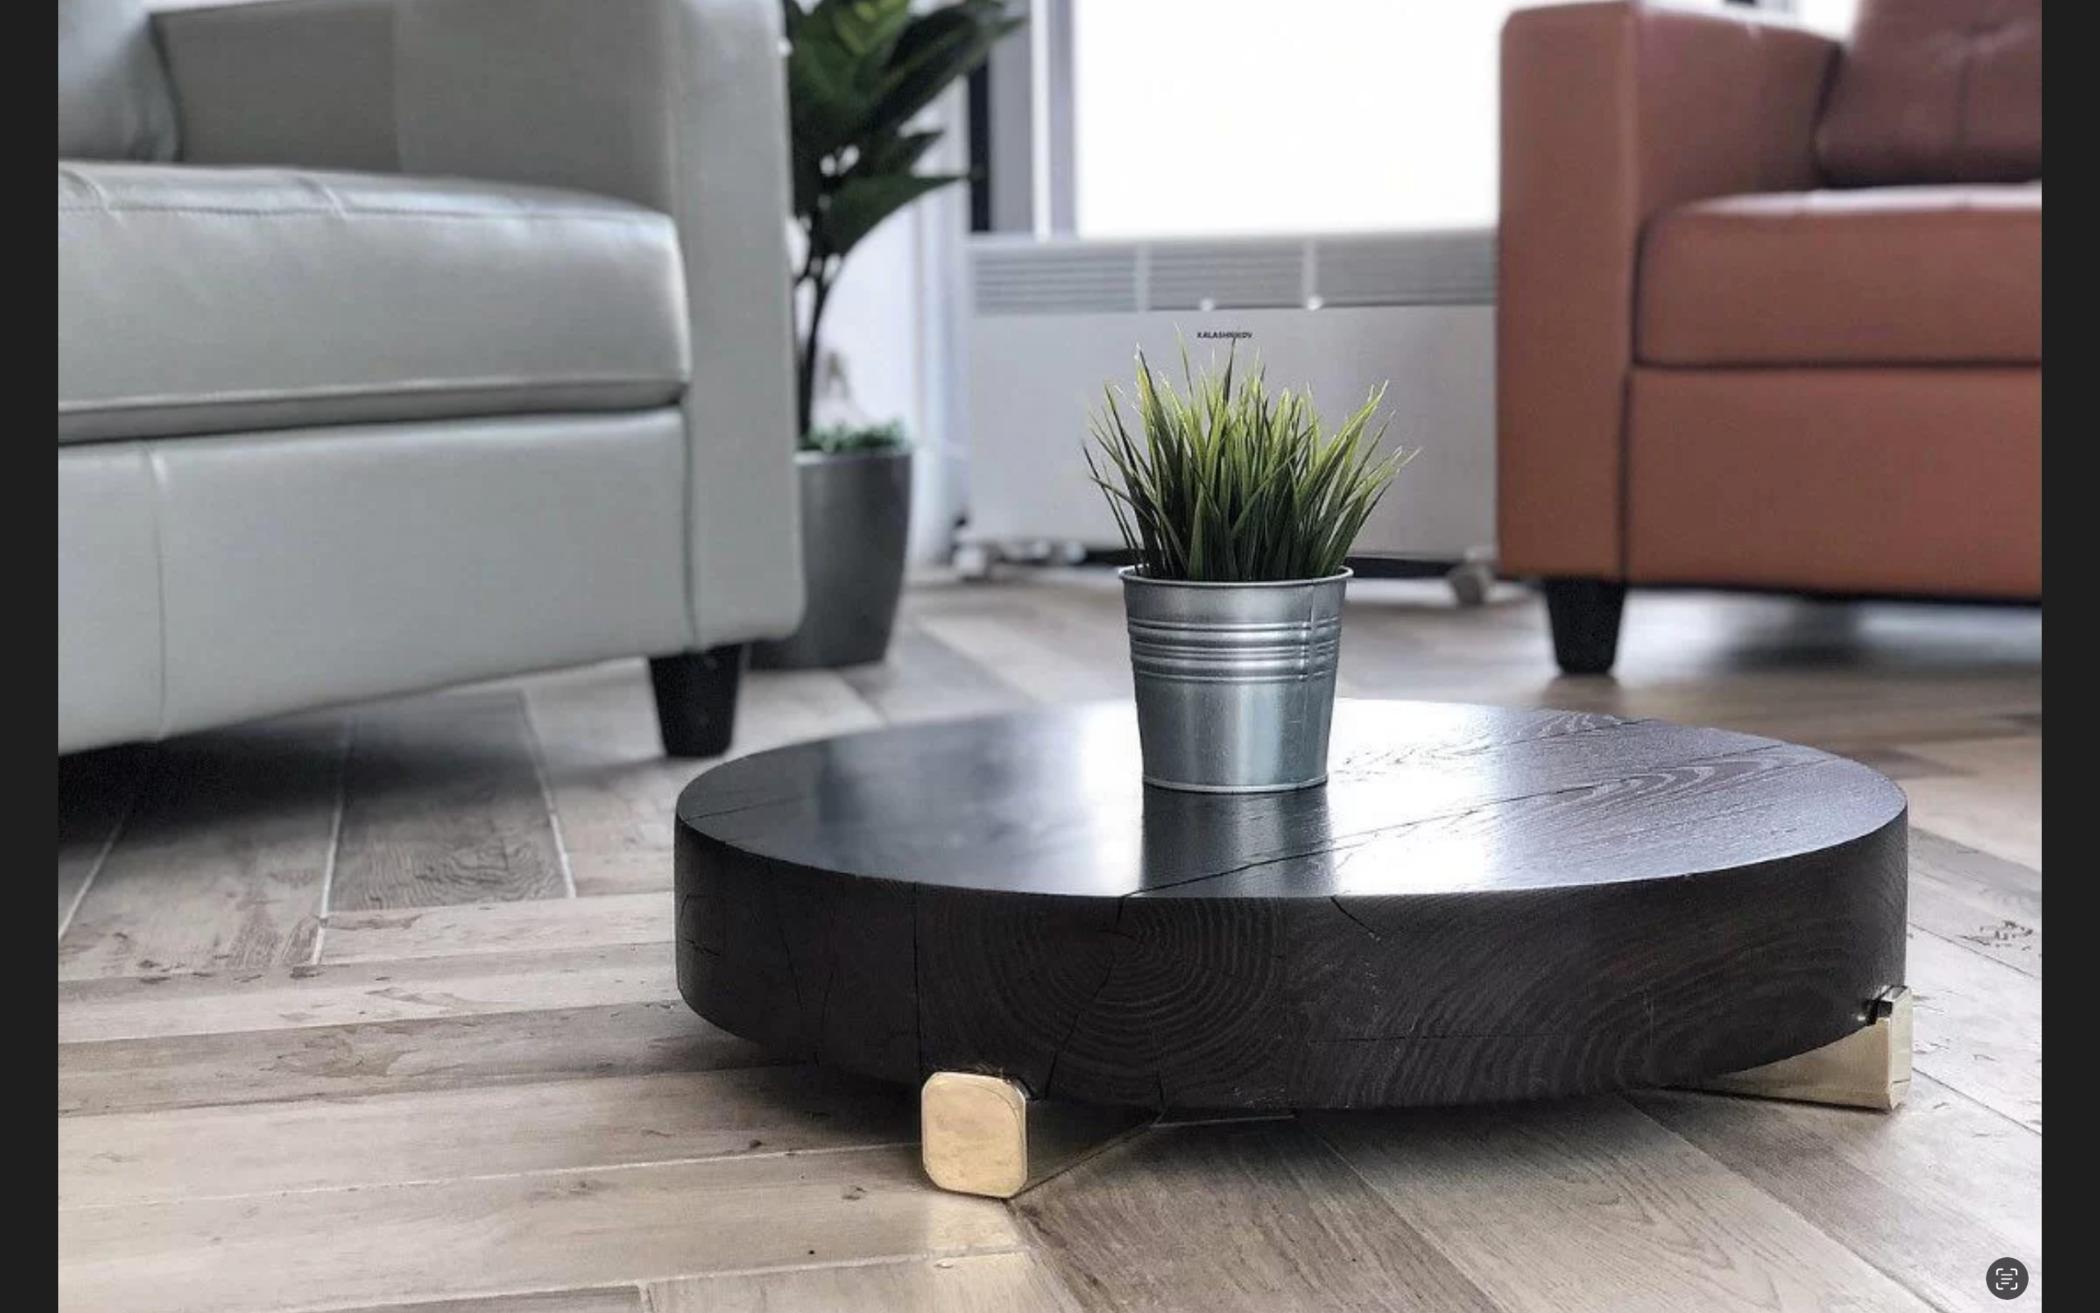 An oak coffee table will perfectly fit into the interior for people who appreciate the subtlety of the beauty of nature.
Diameter 60cm.
Brass base.
Height 15cm.
Gift,stylish table,table as a gift,small table,gift for parents,gift for